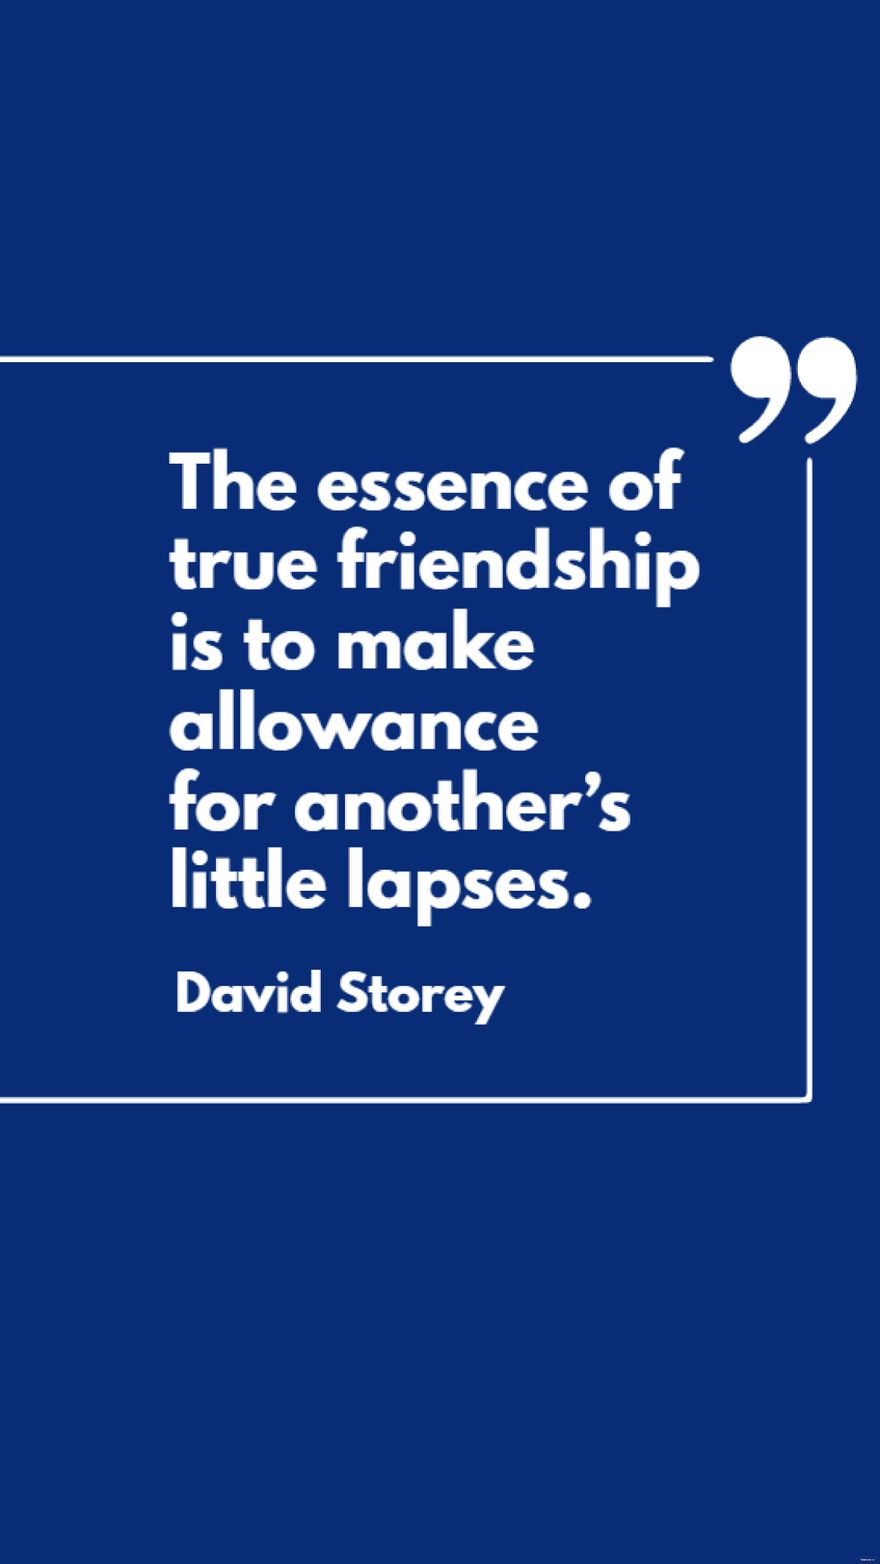 Free David Storey - The essence of true friendship is to make allowance for another’s little lapses. in JPG